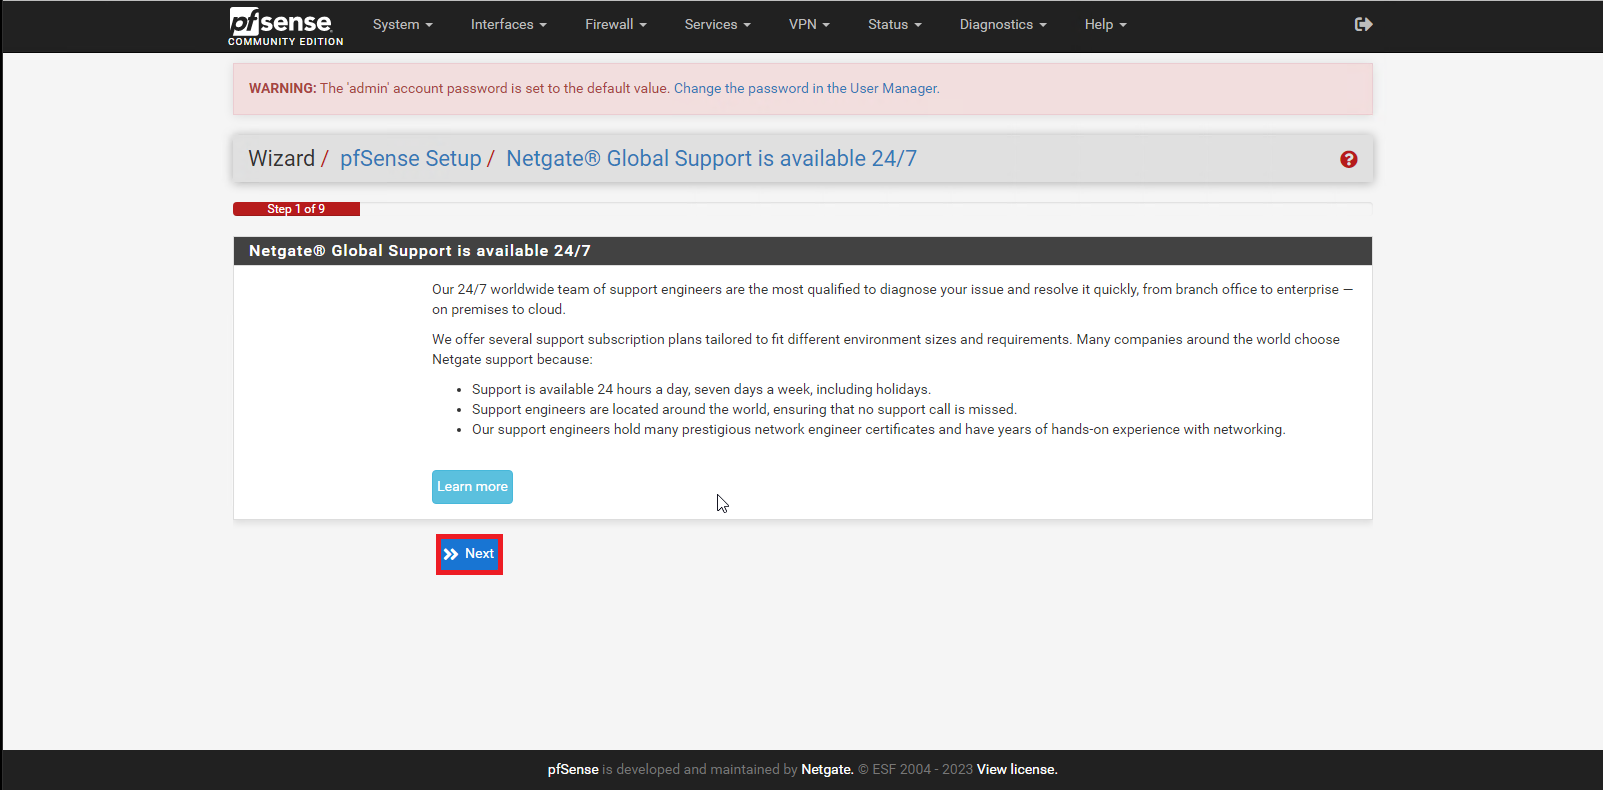 Netgate Global Support is available 24/7画面